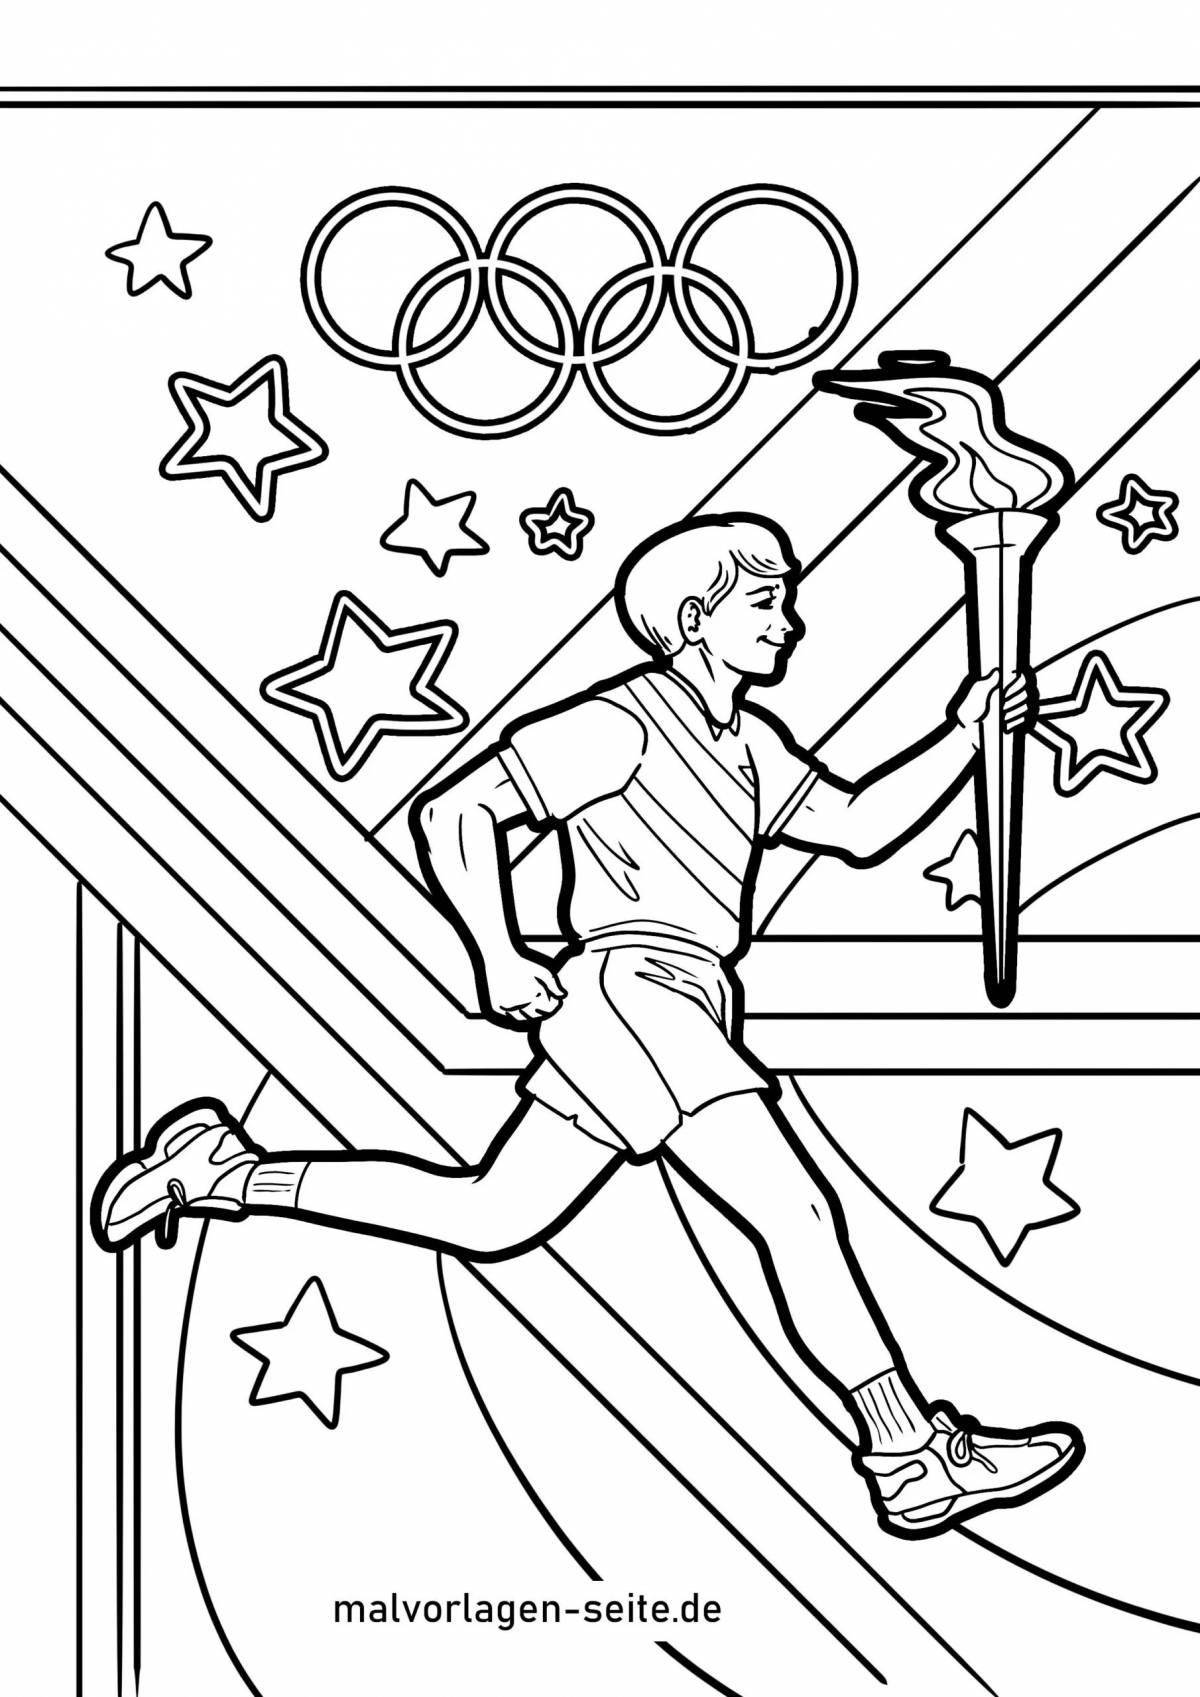 Adorable olympic coloring book for kids